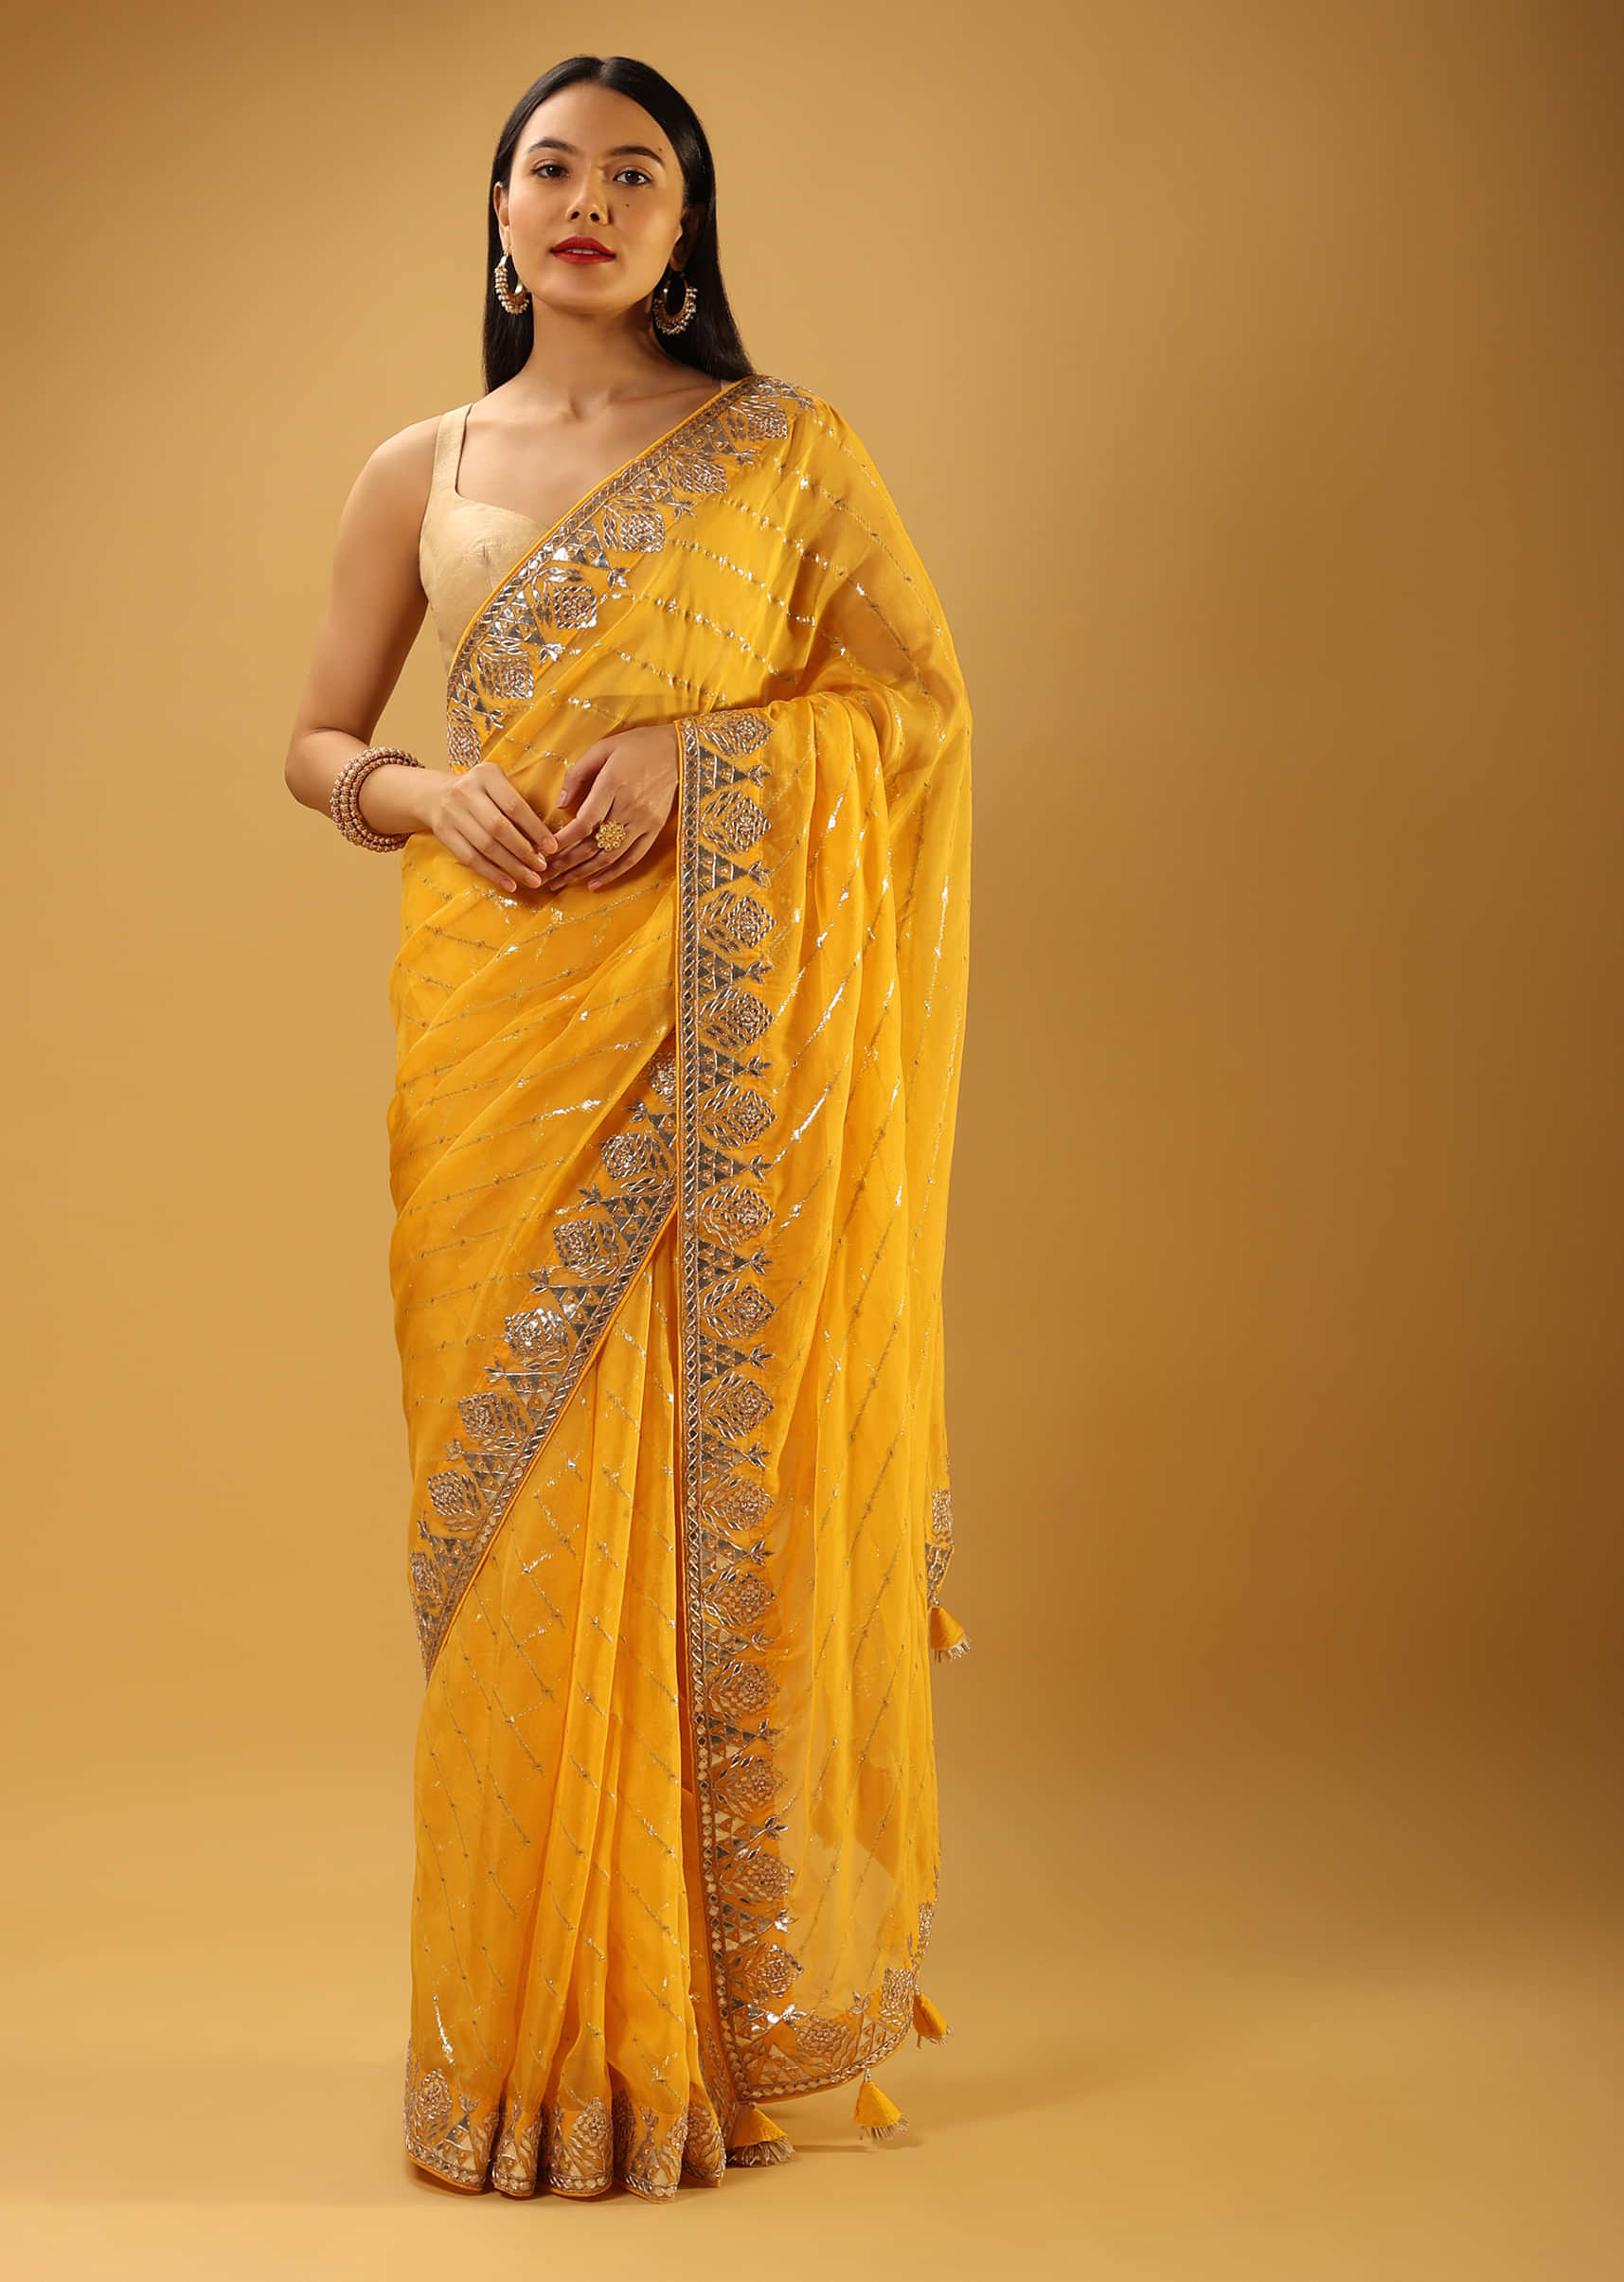 Sun Yellow Saree In Organza With Lurex Woven Diagonal Stripes And Gotta Embroidered Geometric And Floral Border 